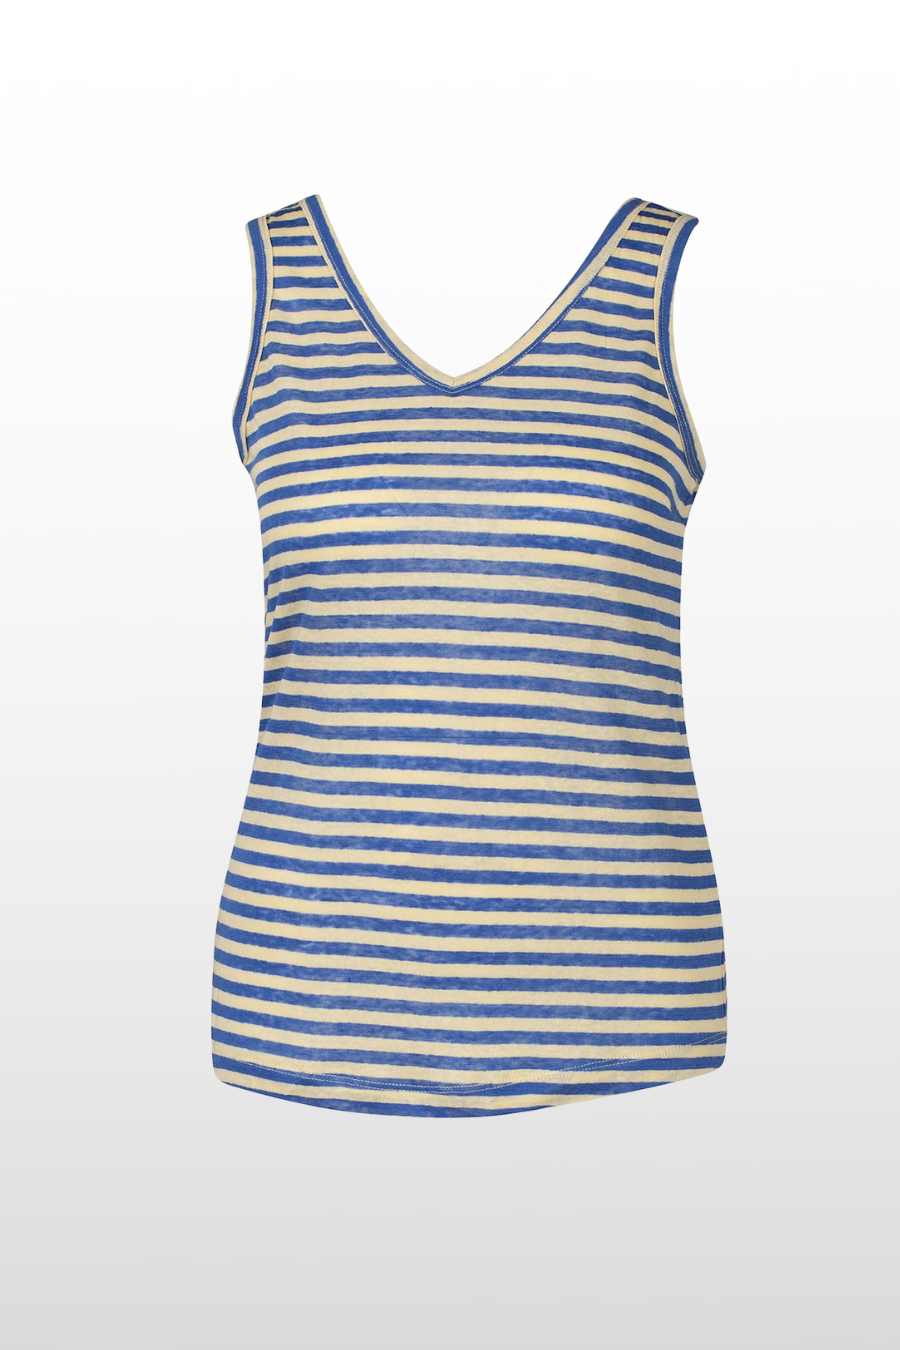 Zilch Clothing, Reversible Tank Top